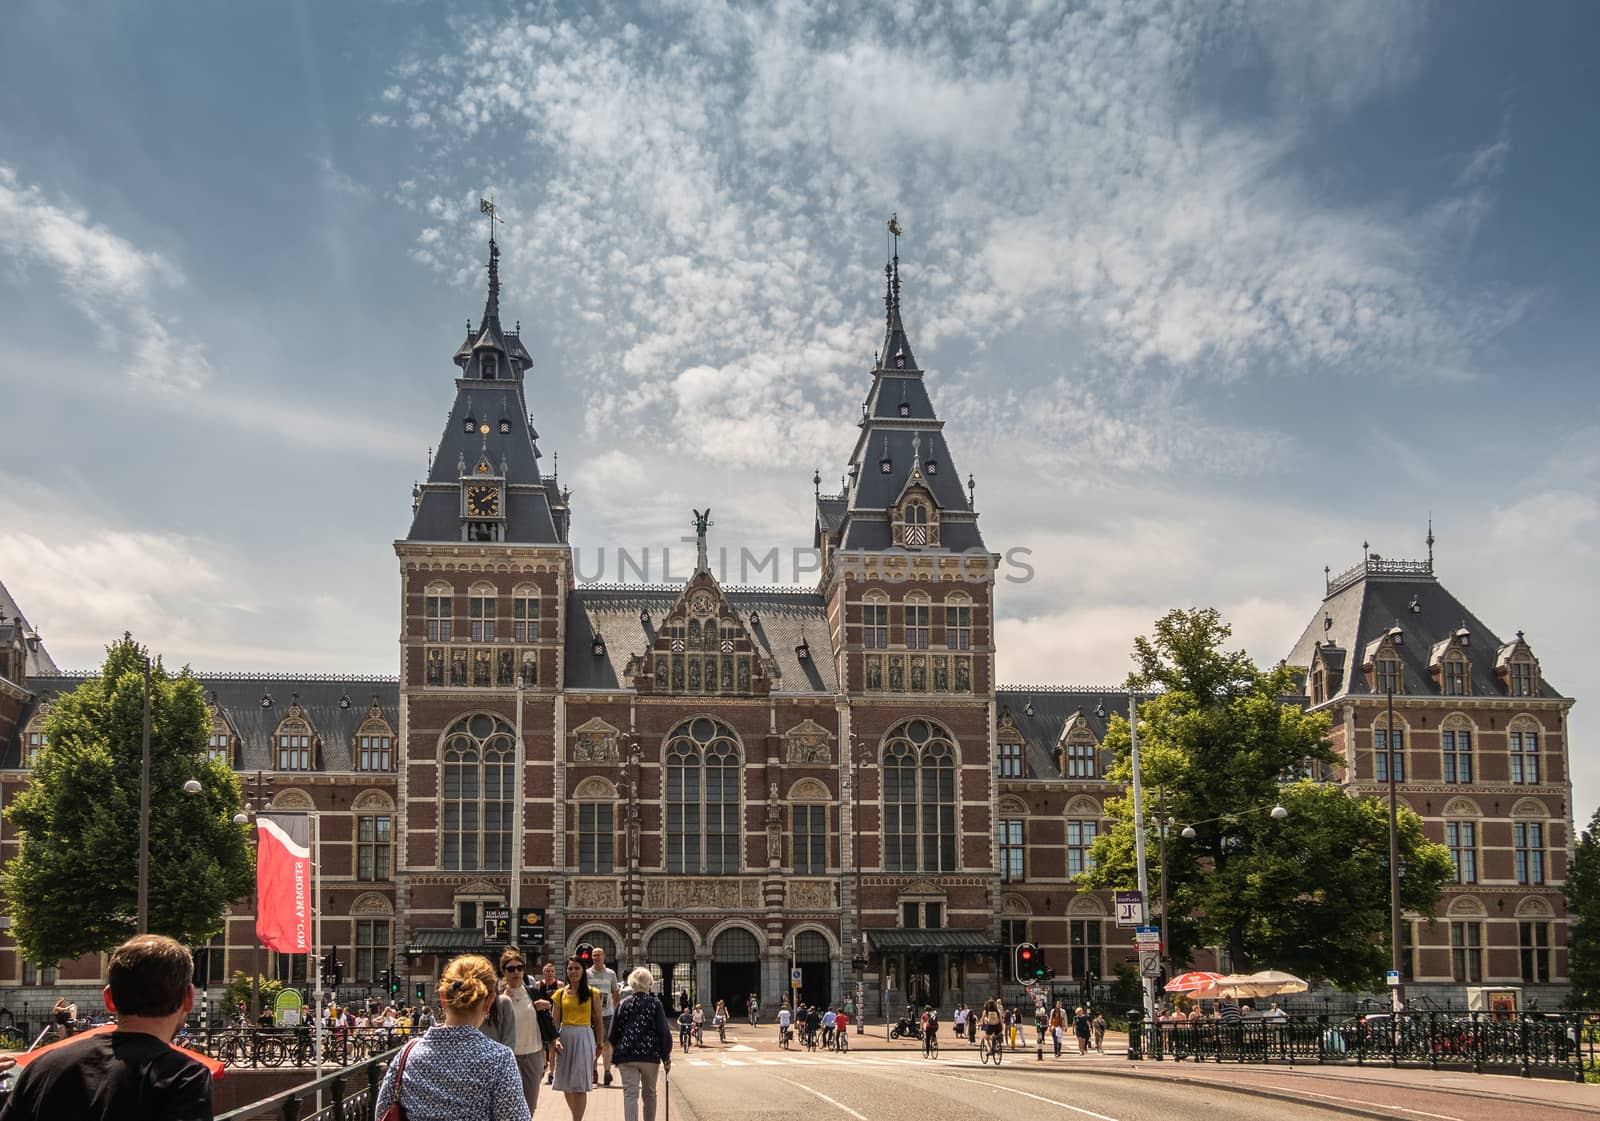 Amsterdam, the Netherlands - June 30, 2019: Wide shot of Monumental facade with towers in beige and red bricks. Statues and frescoes. Under blue-whtie cloudscape. People in front.